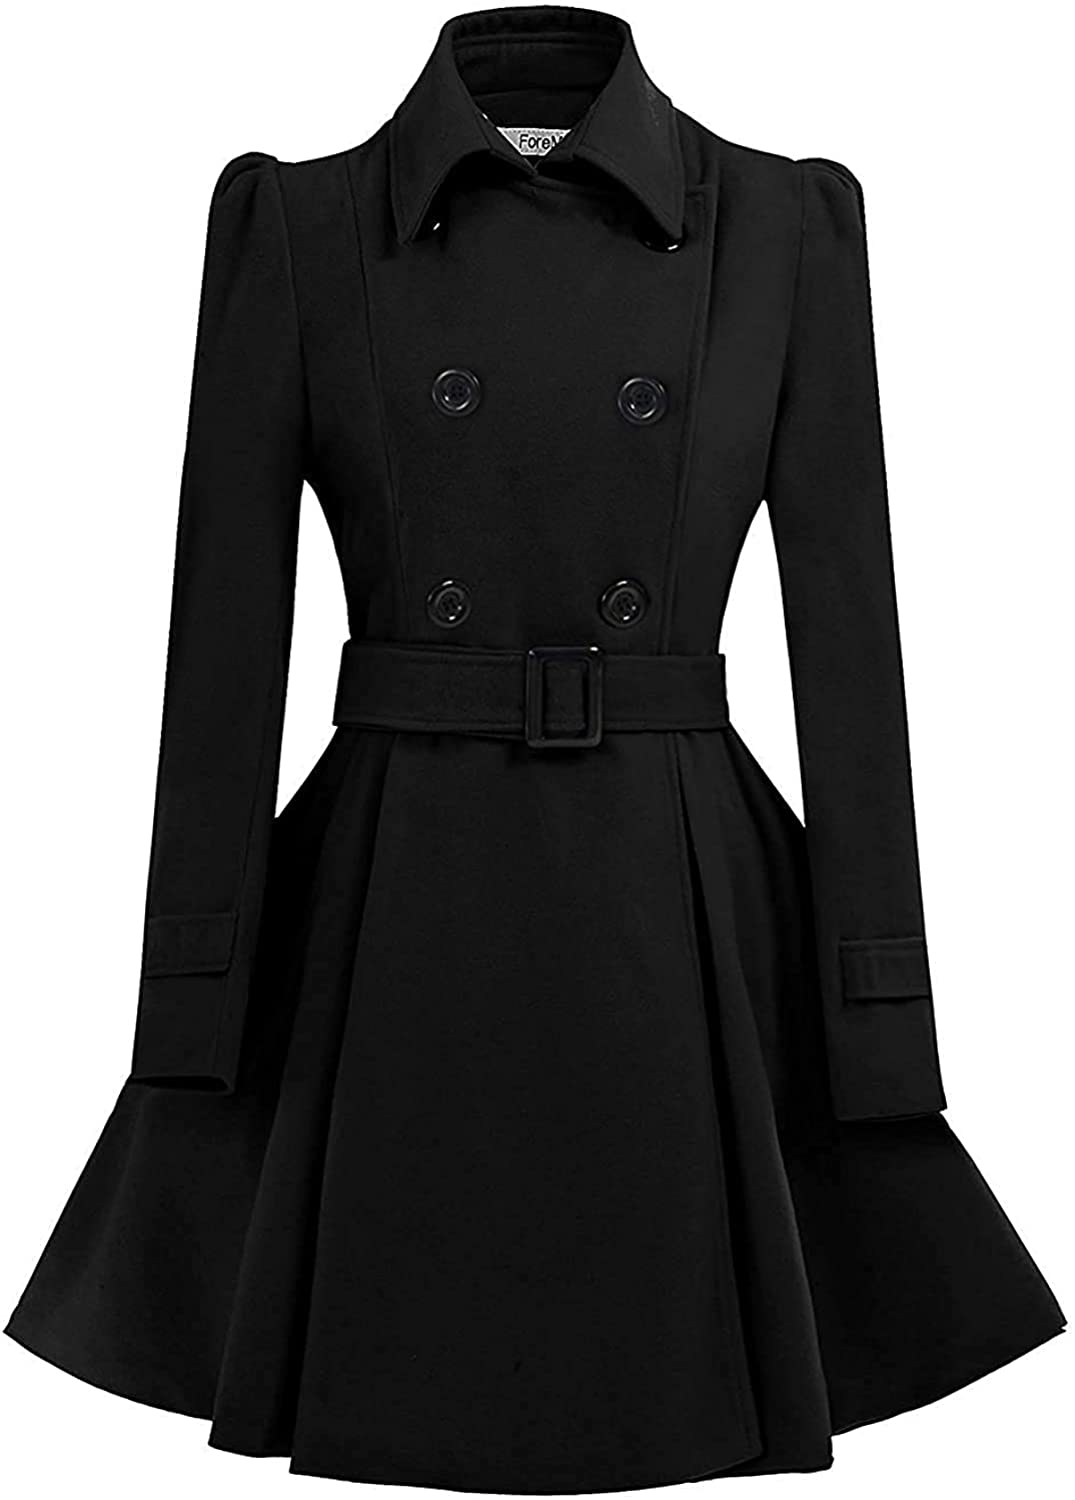 ForeMode Women Swing Double Breasted Wool Pea Coat with Belt Buckle ...